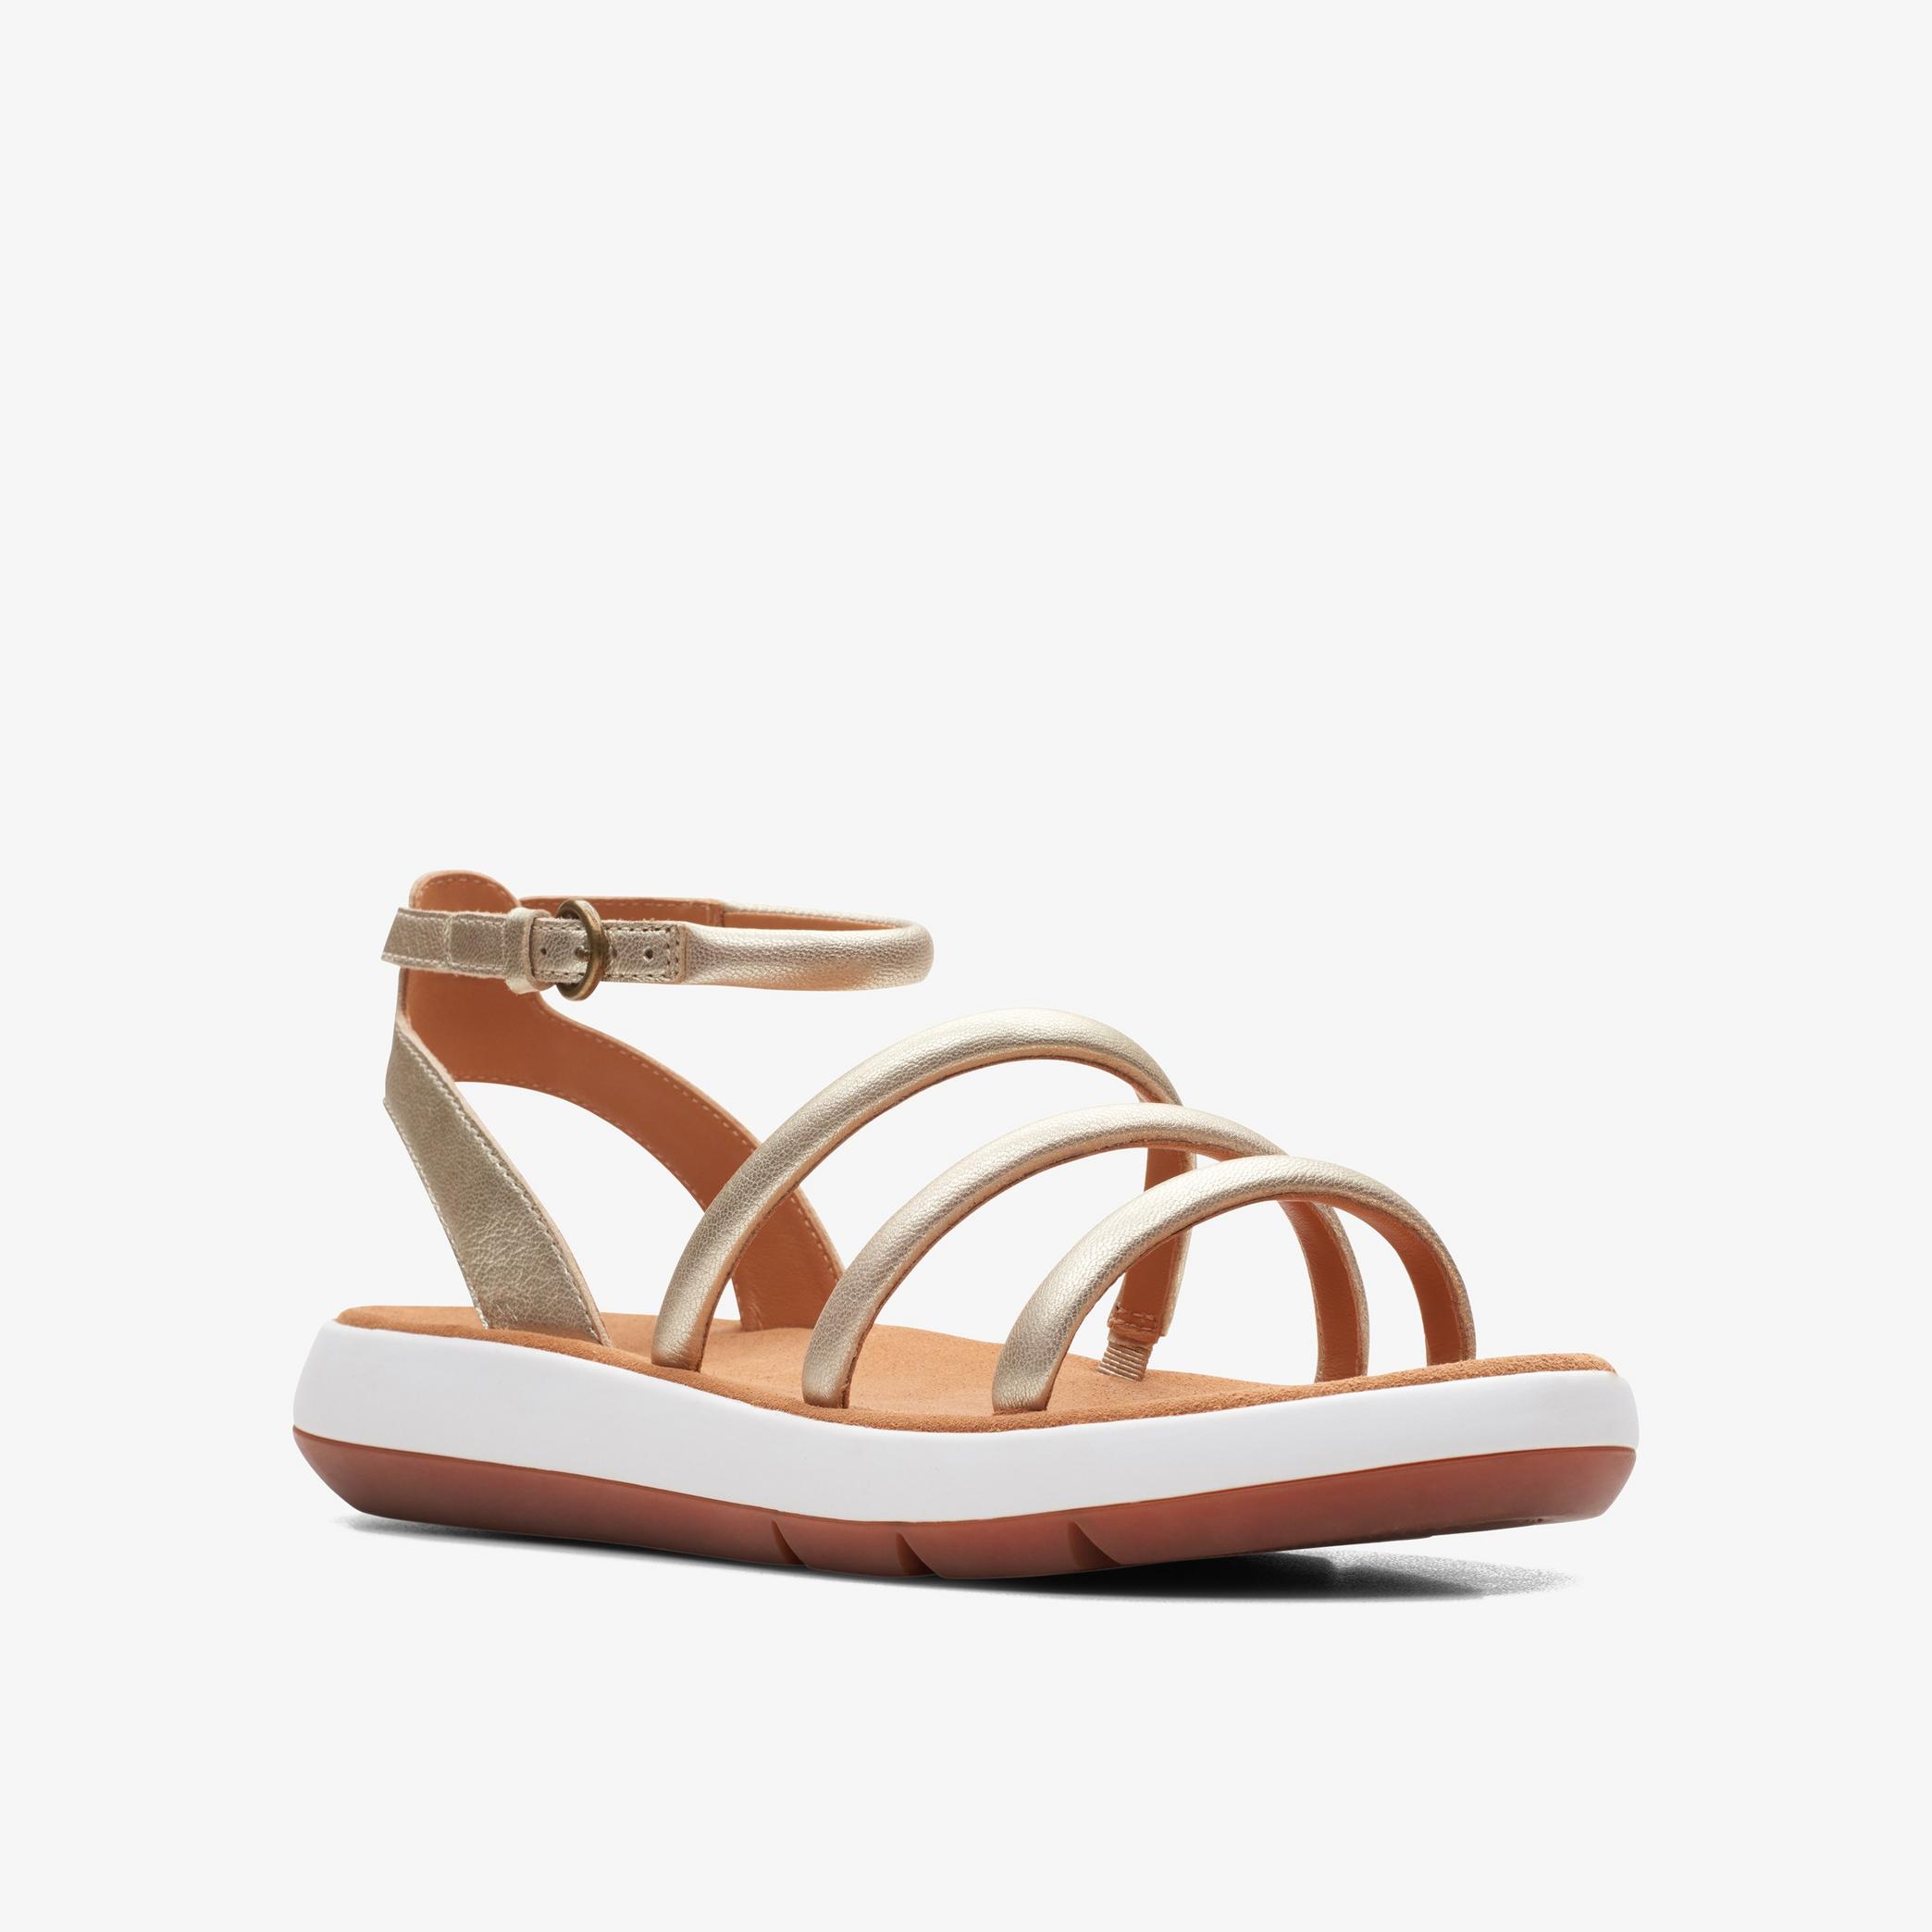 Jemsa Style Champagne Leather Flat Sandals, view 3 of 6